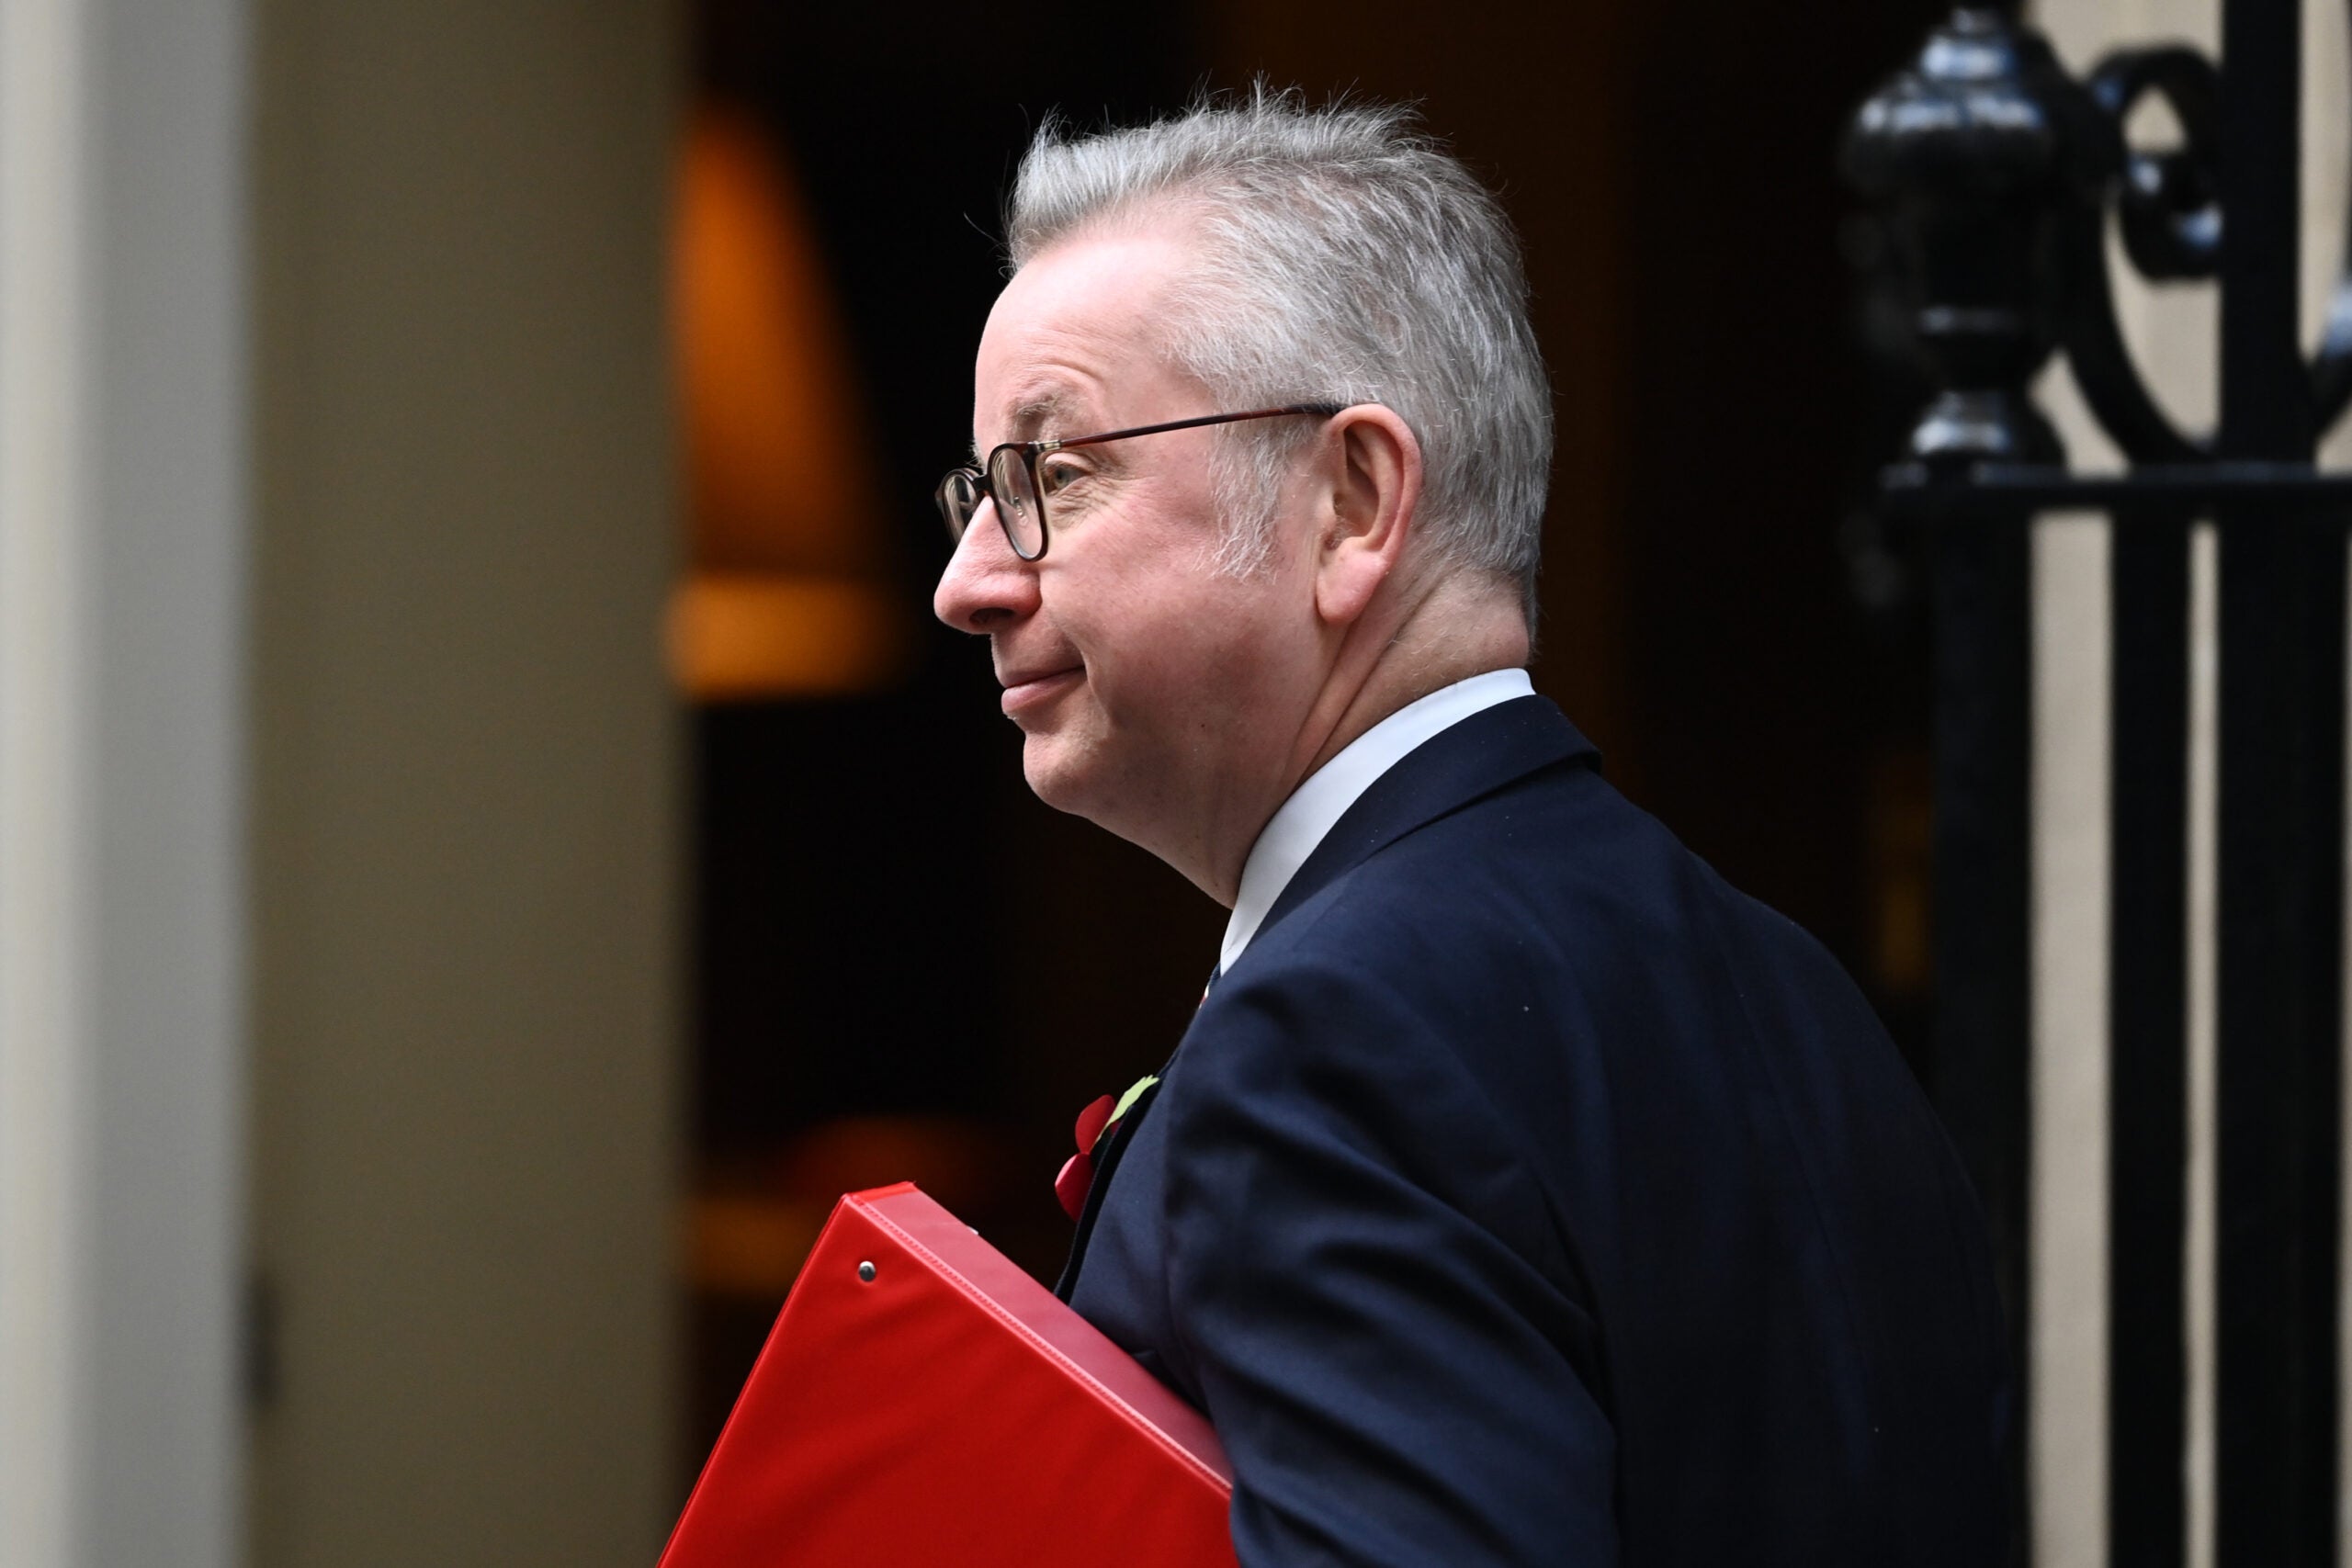 Michael Gove’s appointment is a sign that levelling up is back on